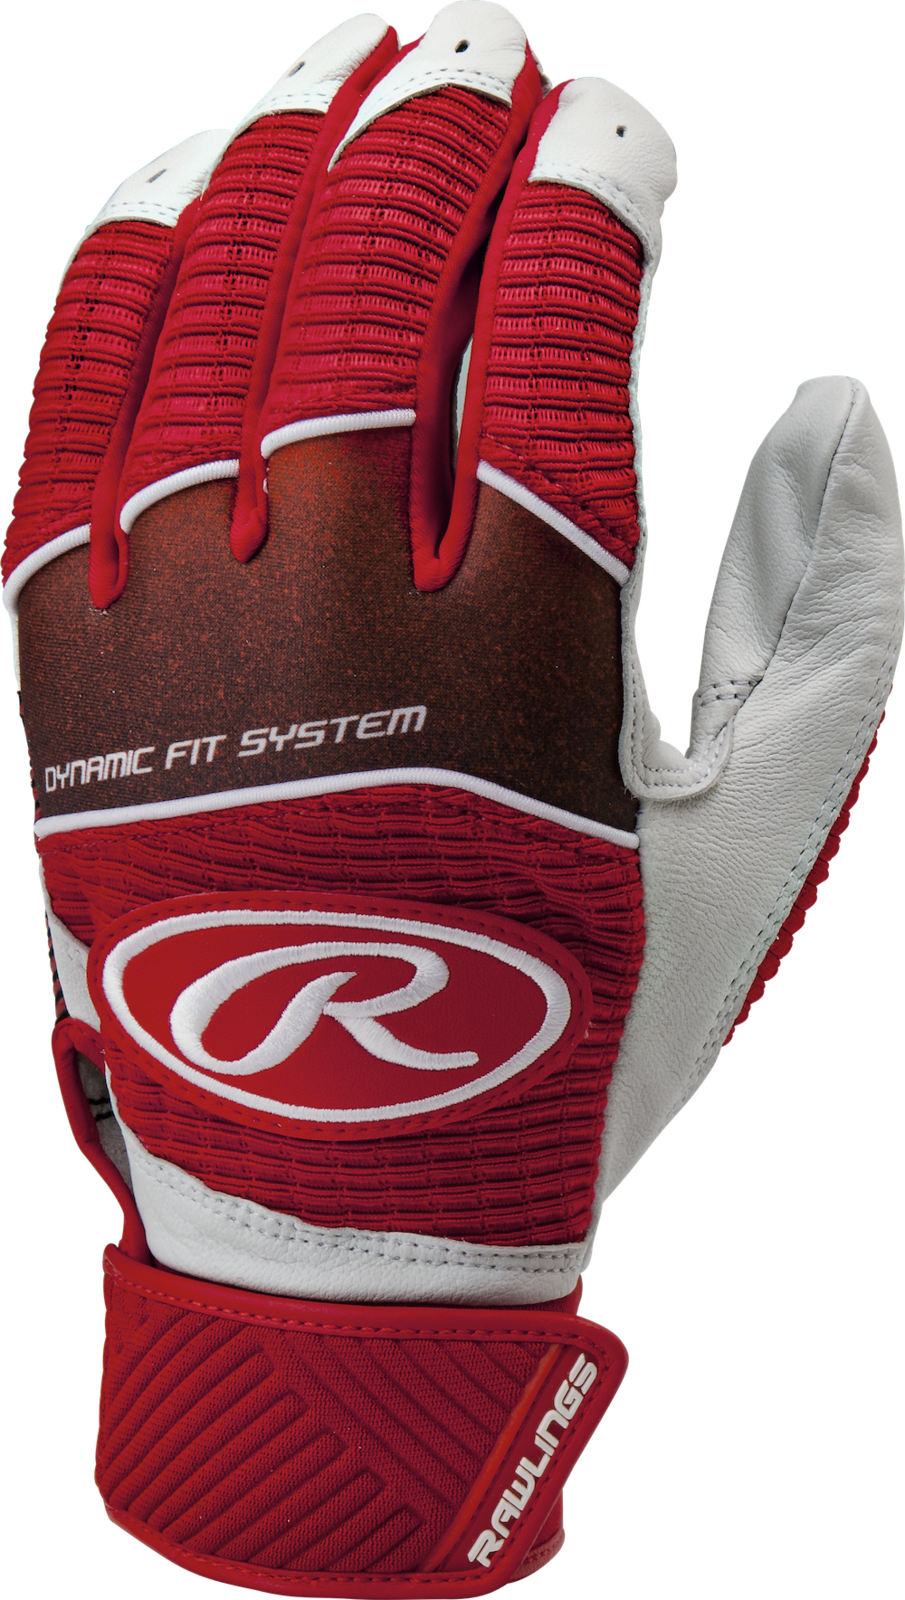 Rawlings Workhorse Batting Gloves - Red